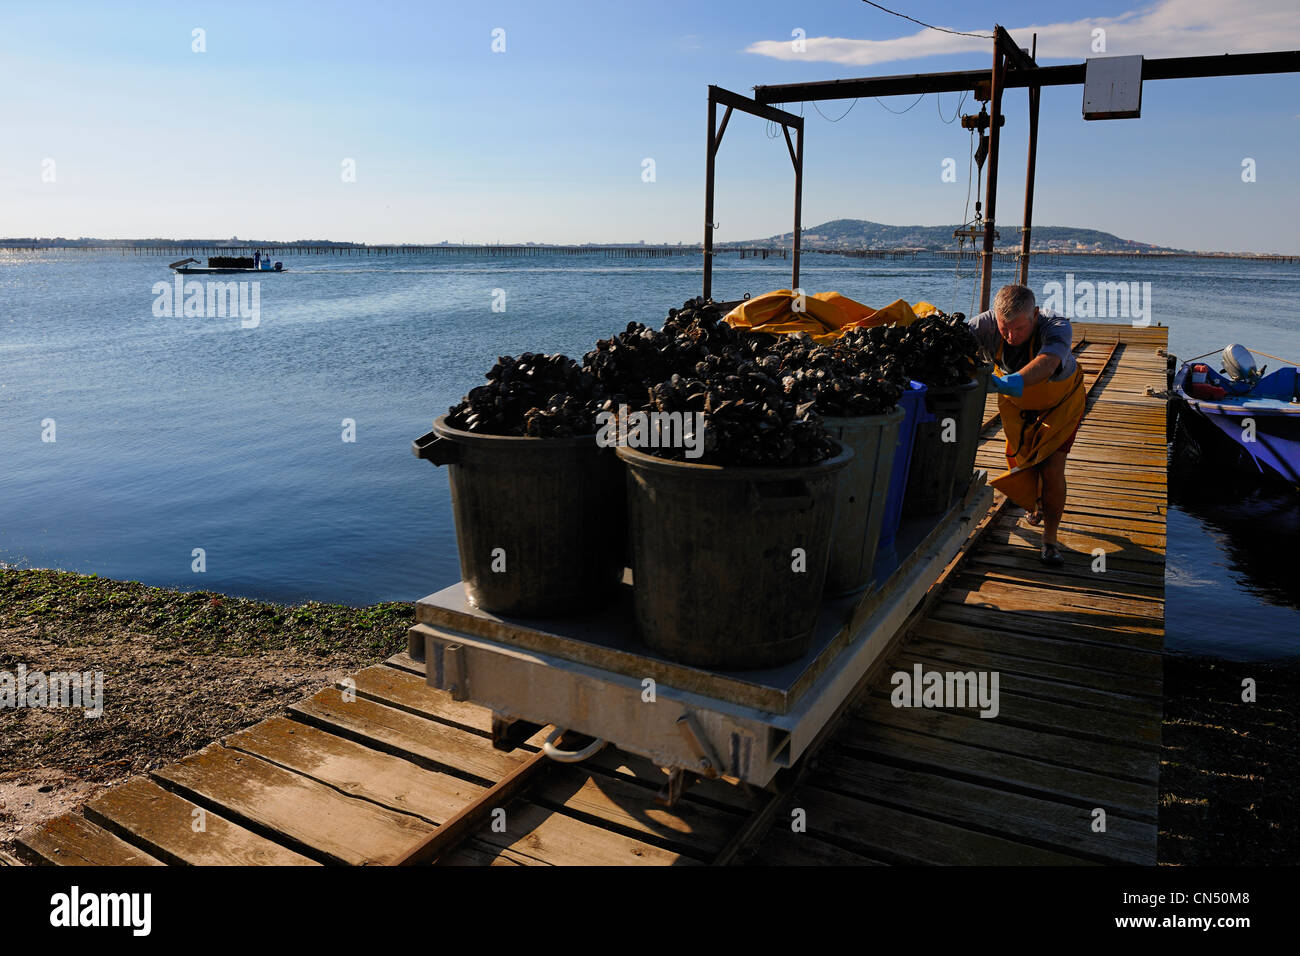 France, Herault, Bouzigues, Bassin de Thau, oyster and mussels farm from the Benezech family at the Place called La Catonniere Stock Photo